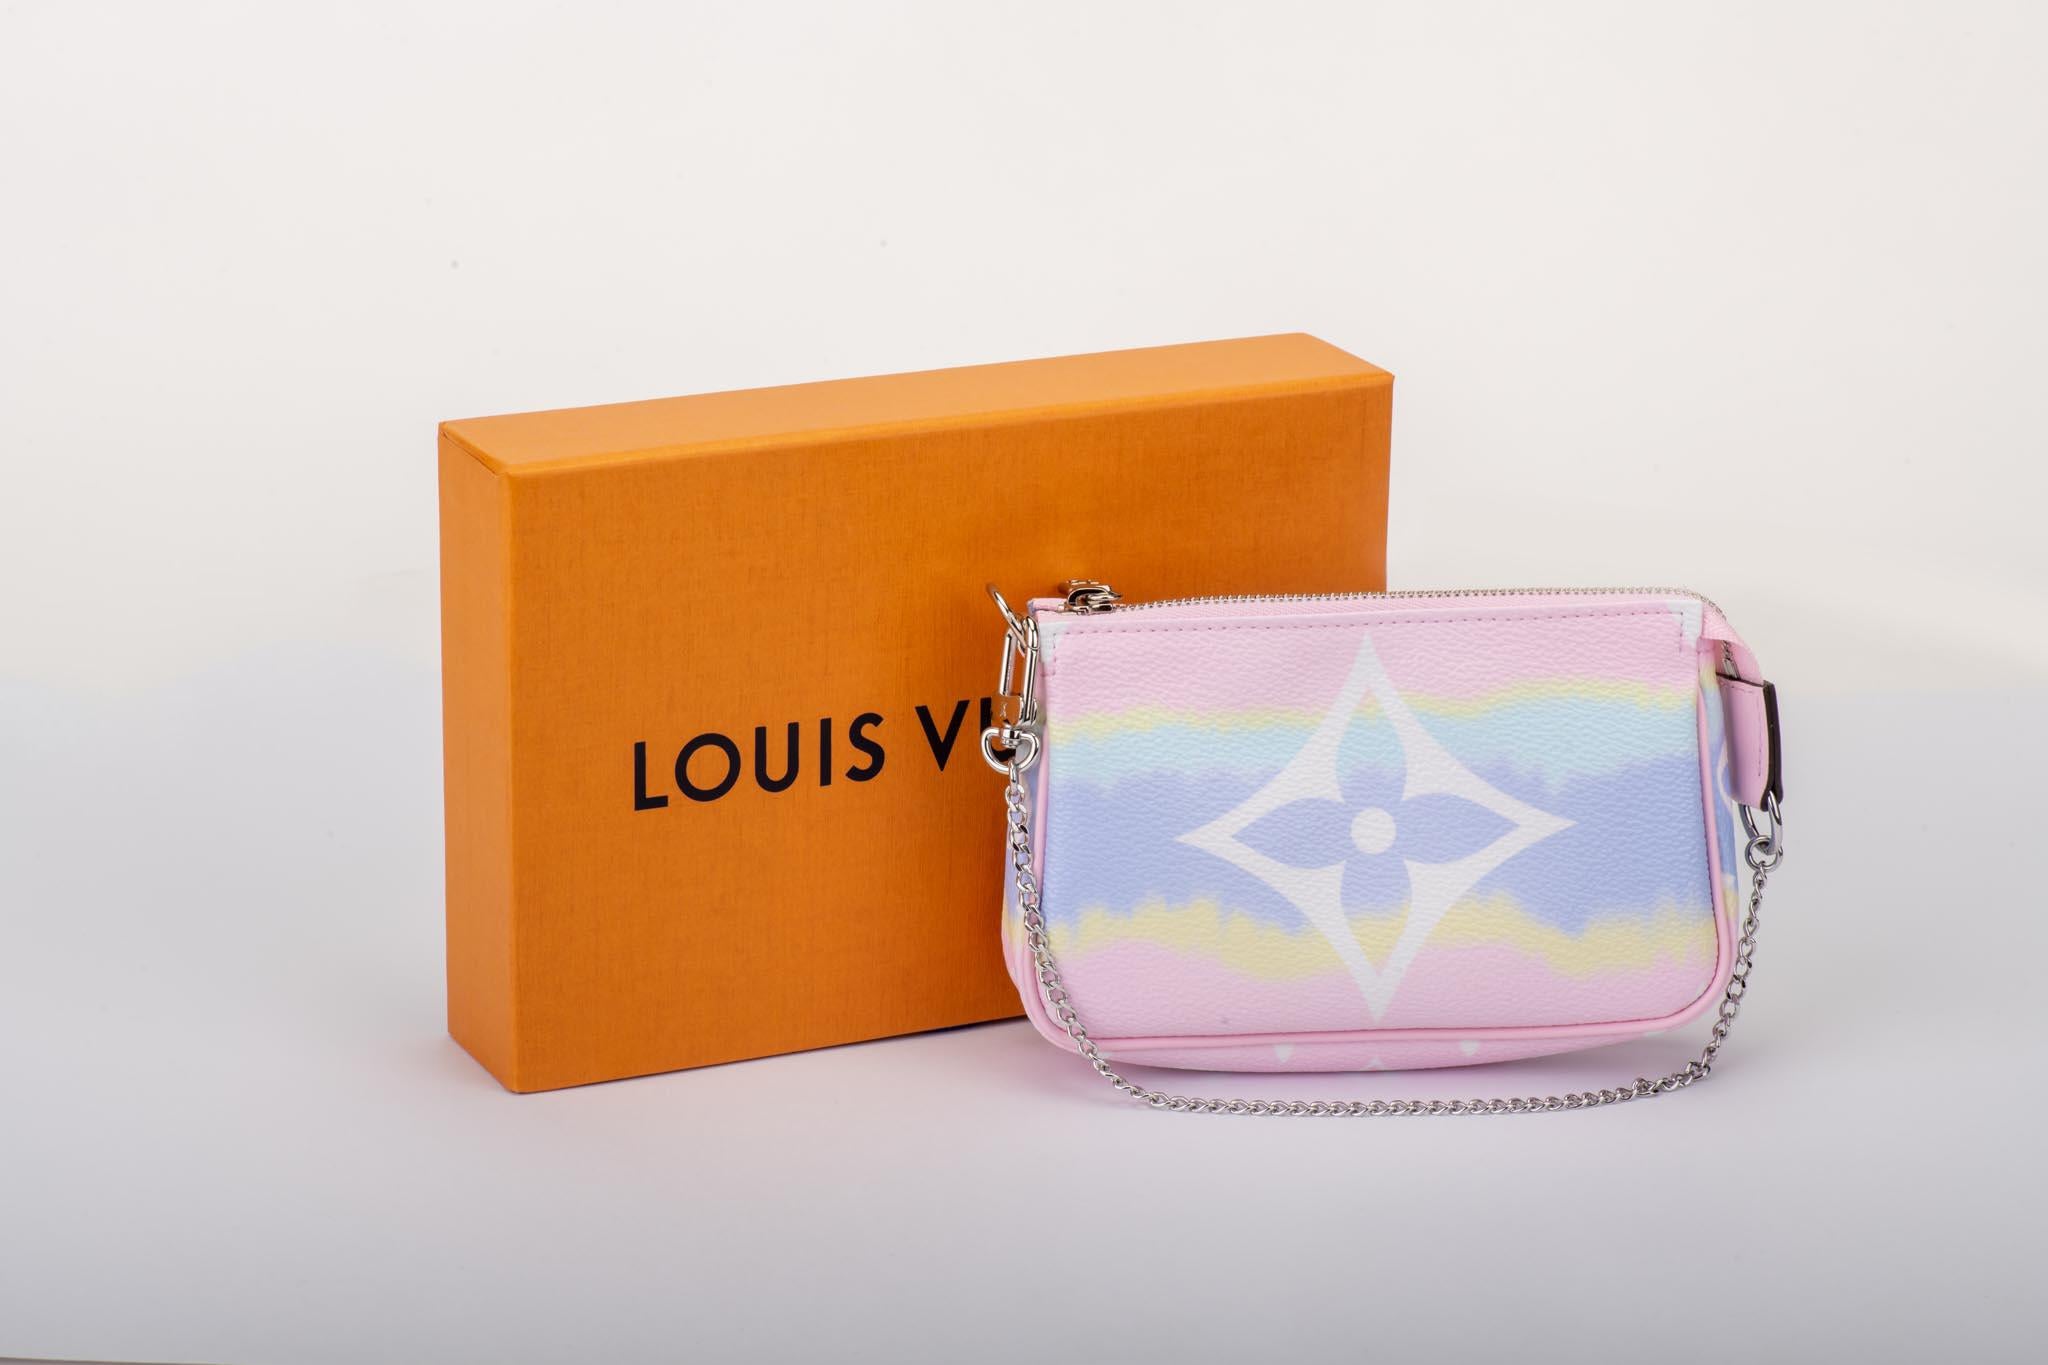 Louis Vuitton limited edition 2020 escale pink mini pochette. Comes with original dust cover and box.